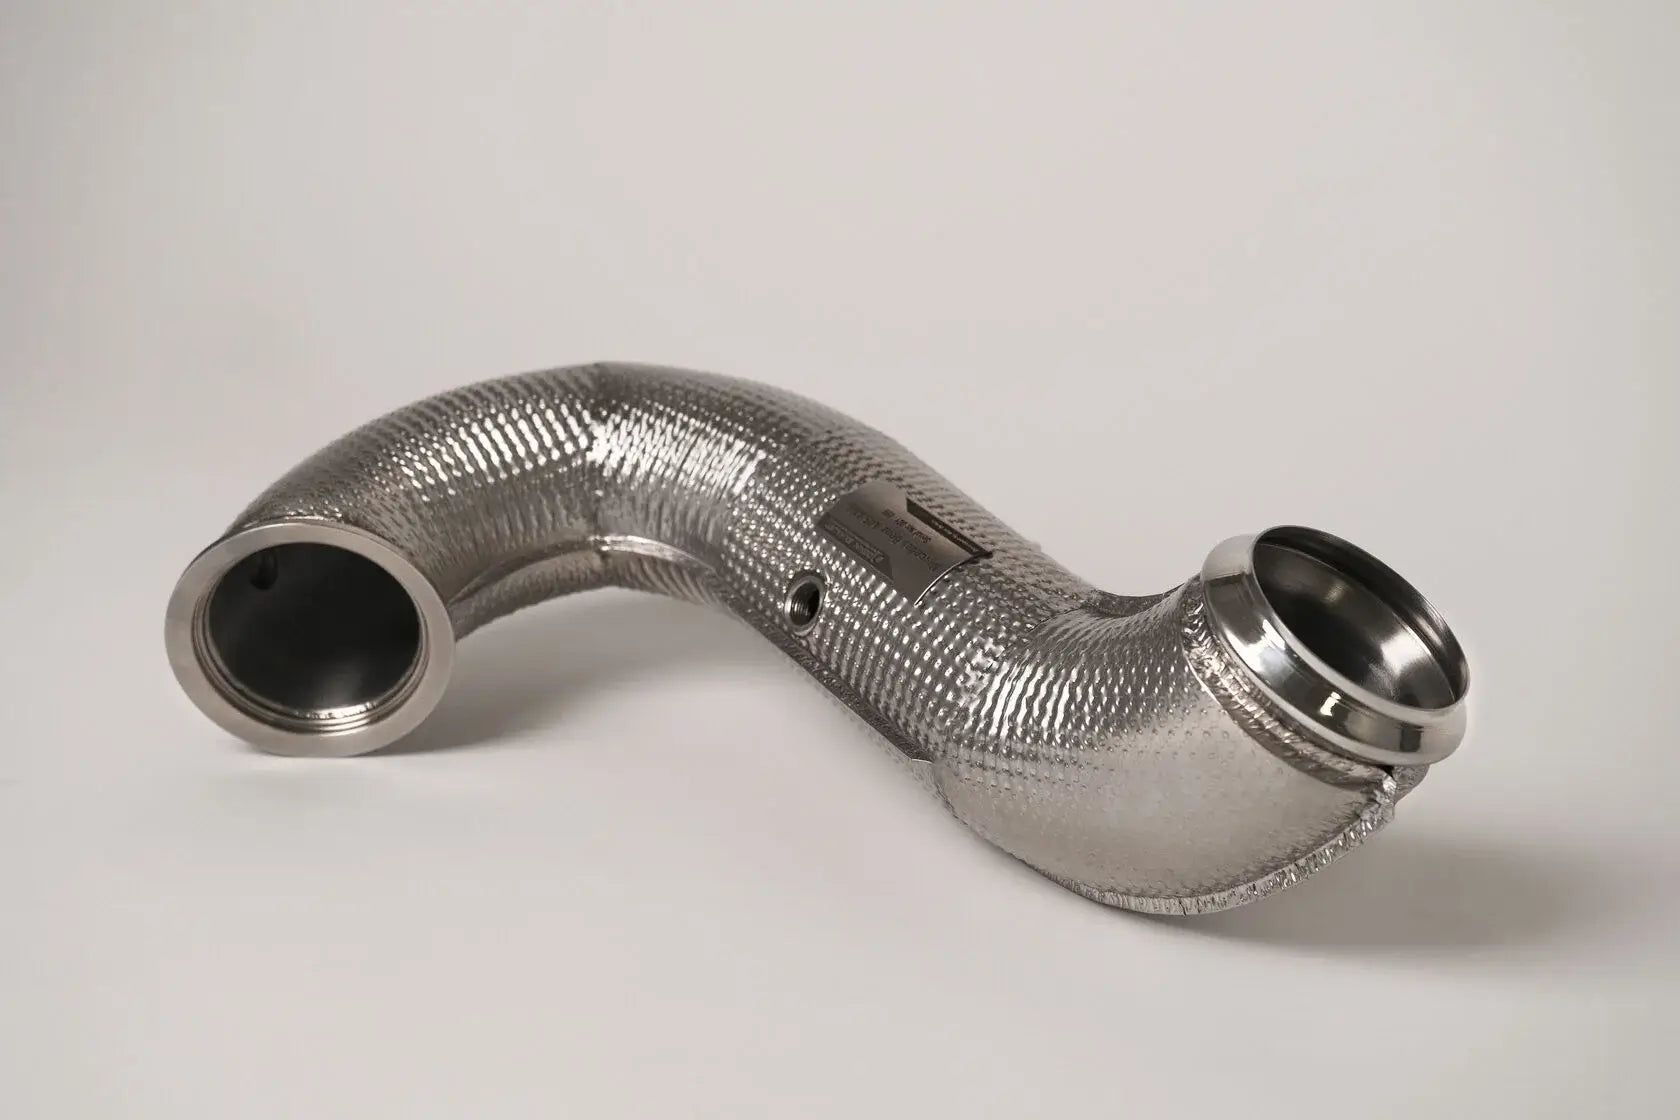 DEIKIN 10-MB.A45S.W177-DP Downpipe for Mercedes-AMG A45 S (W177) without HeatShield Photo-2 